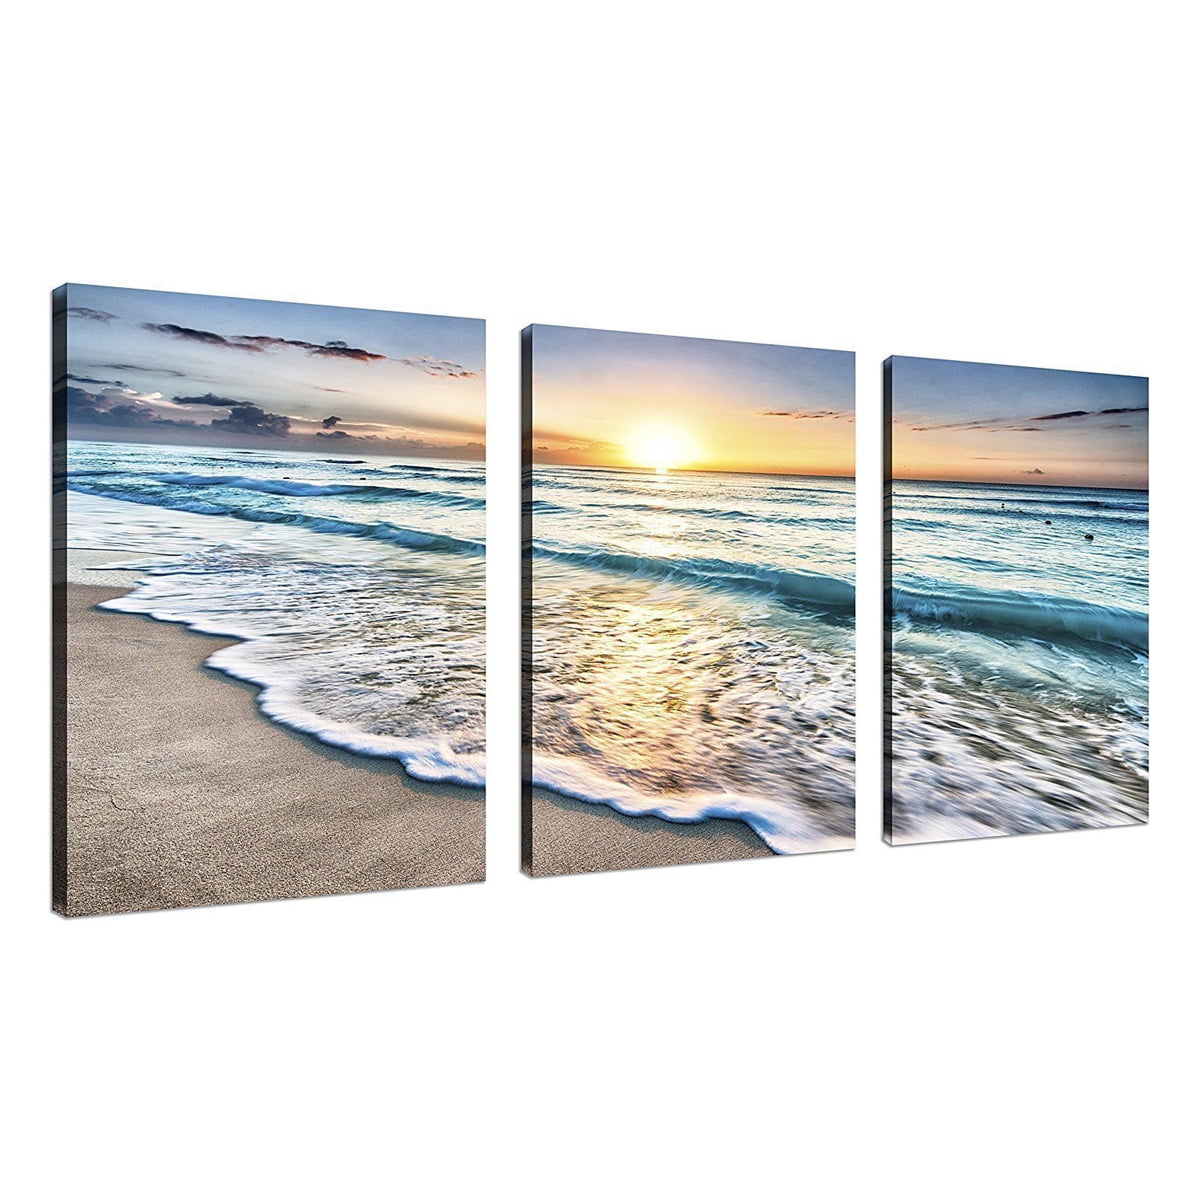 Sunset Sea Beach Abstract Poster Photographic Paper Kids Room Home Art Decor 20 